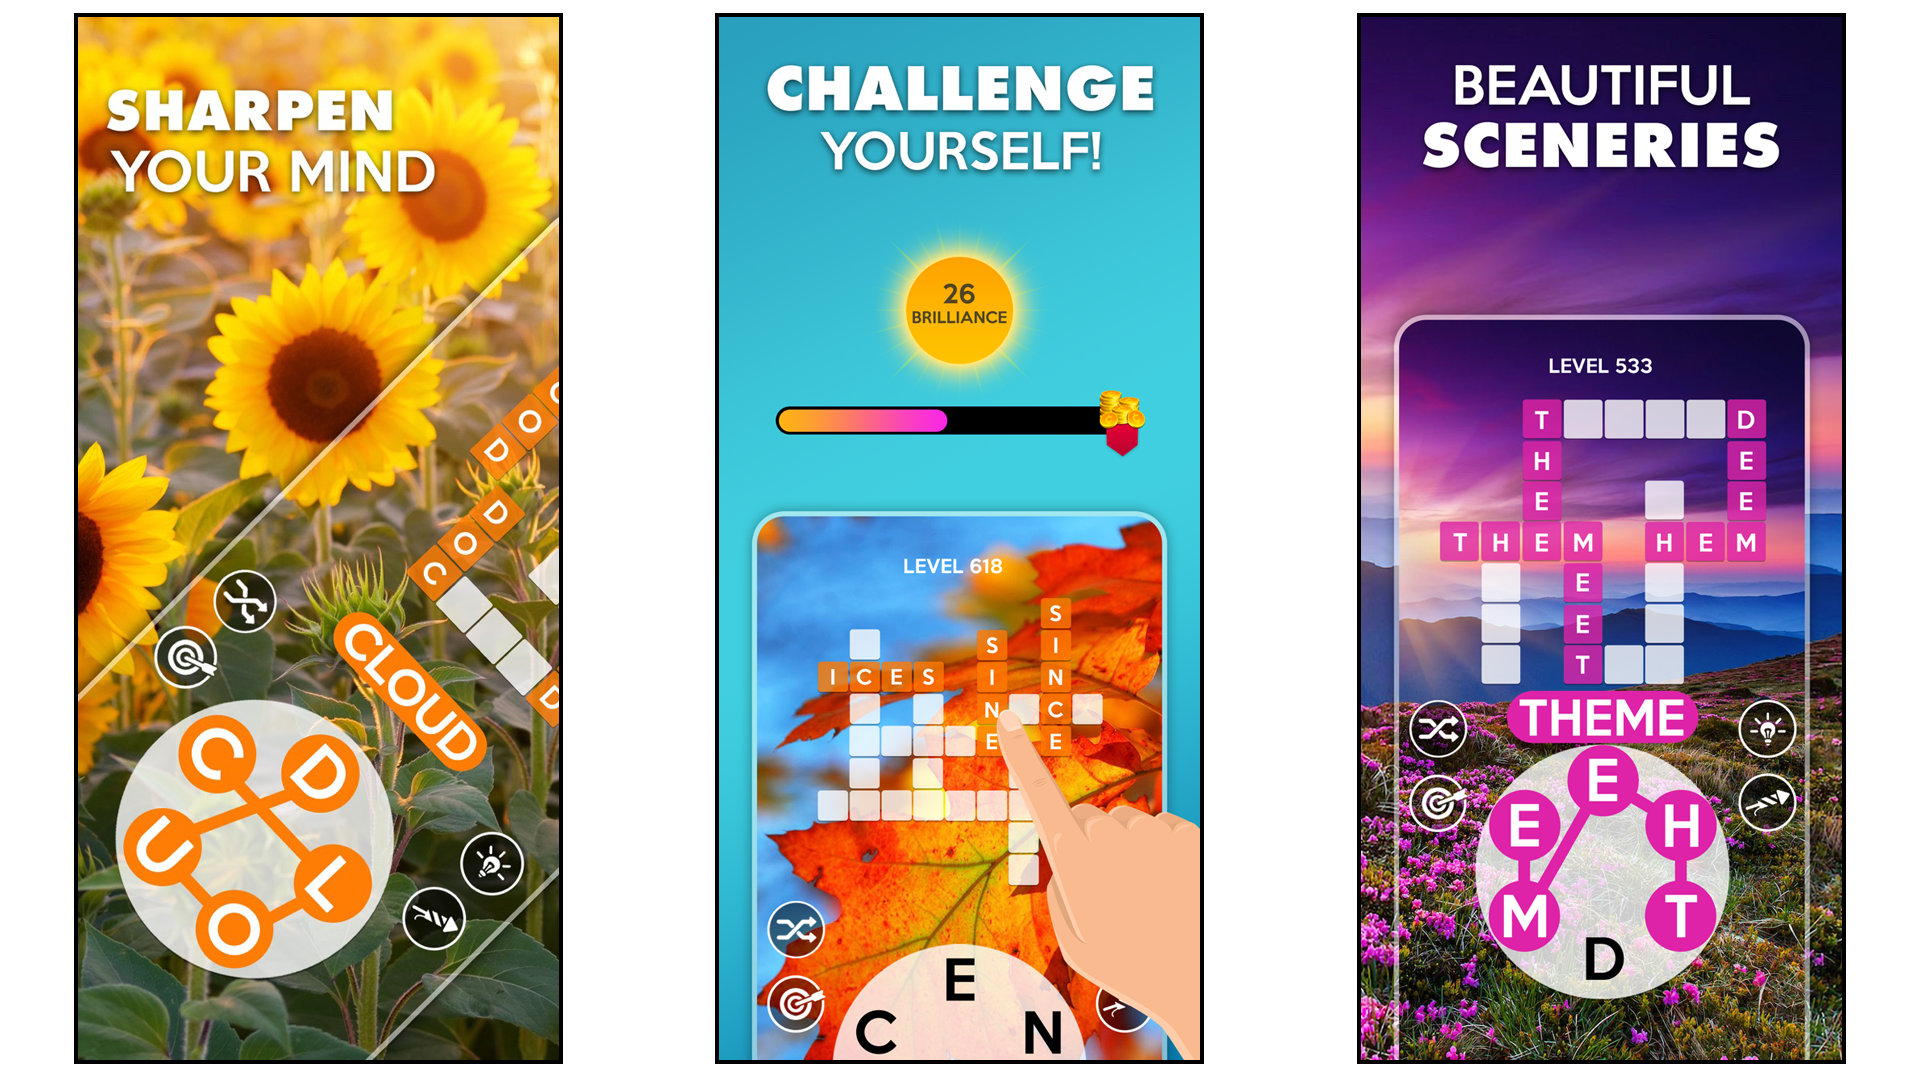 Wordscapes game showing puzzles challenges and unlocked scenery options